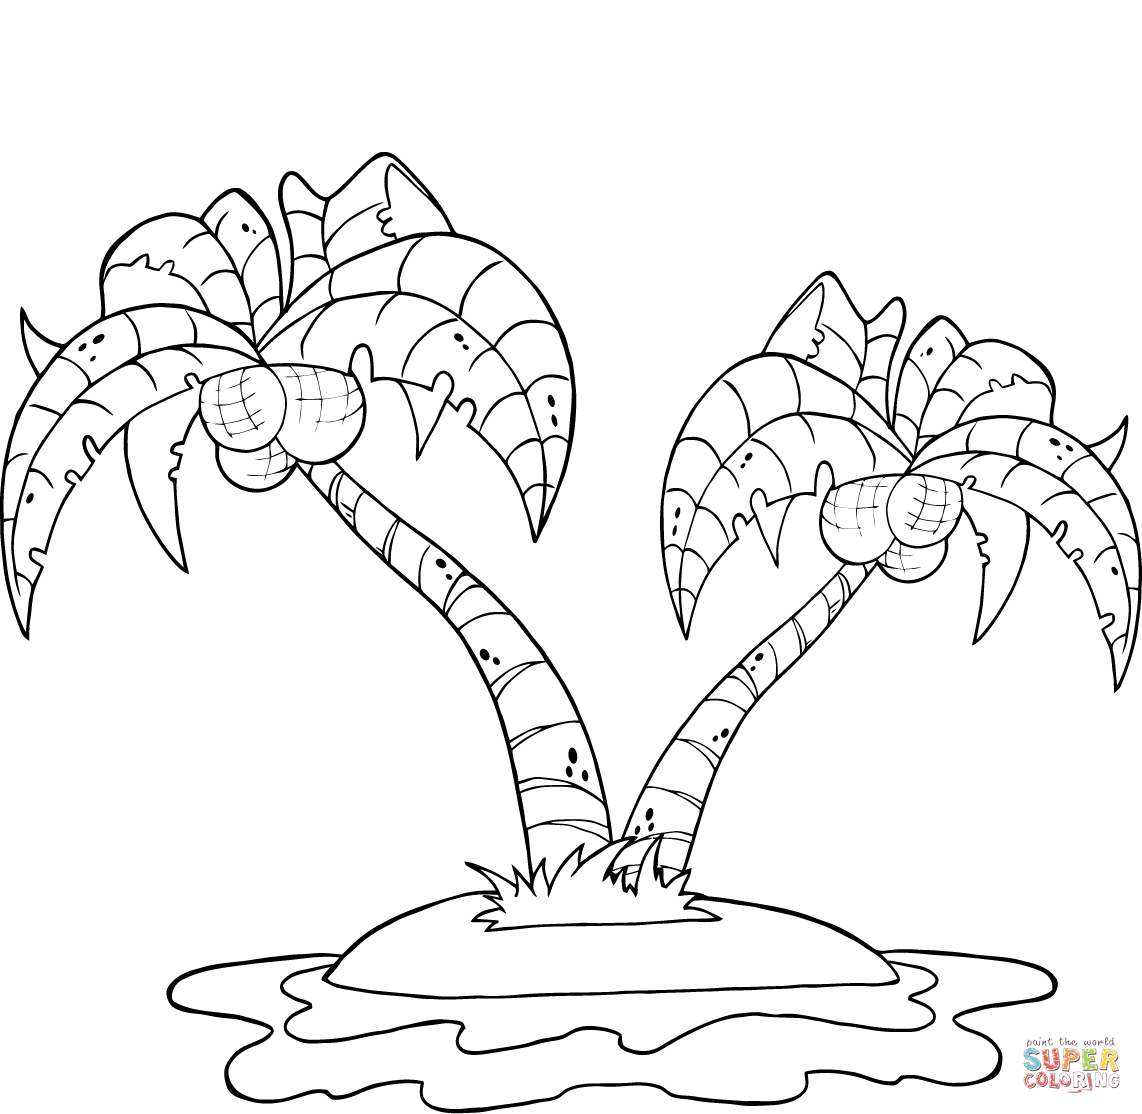 Coconut Palm Trees on Island coloring page